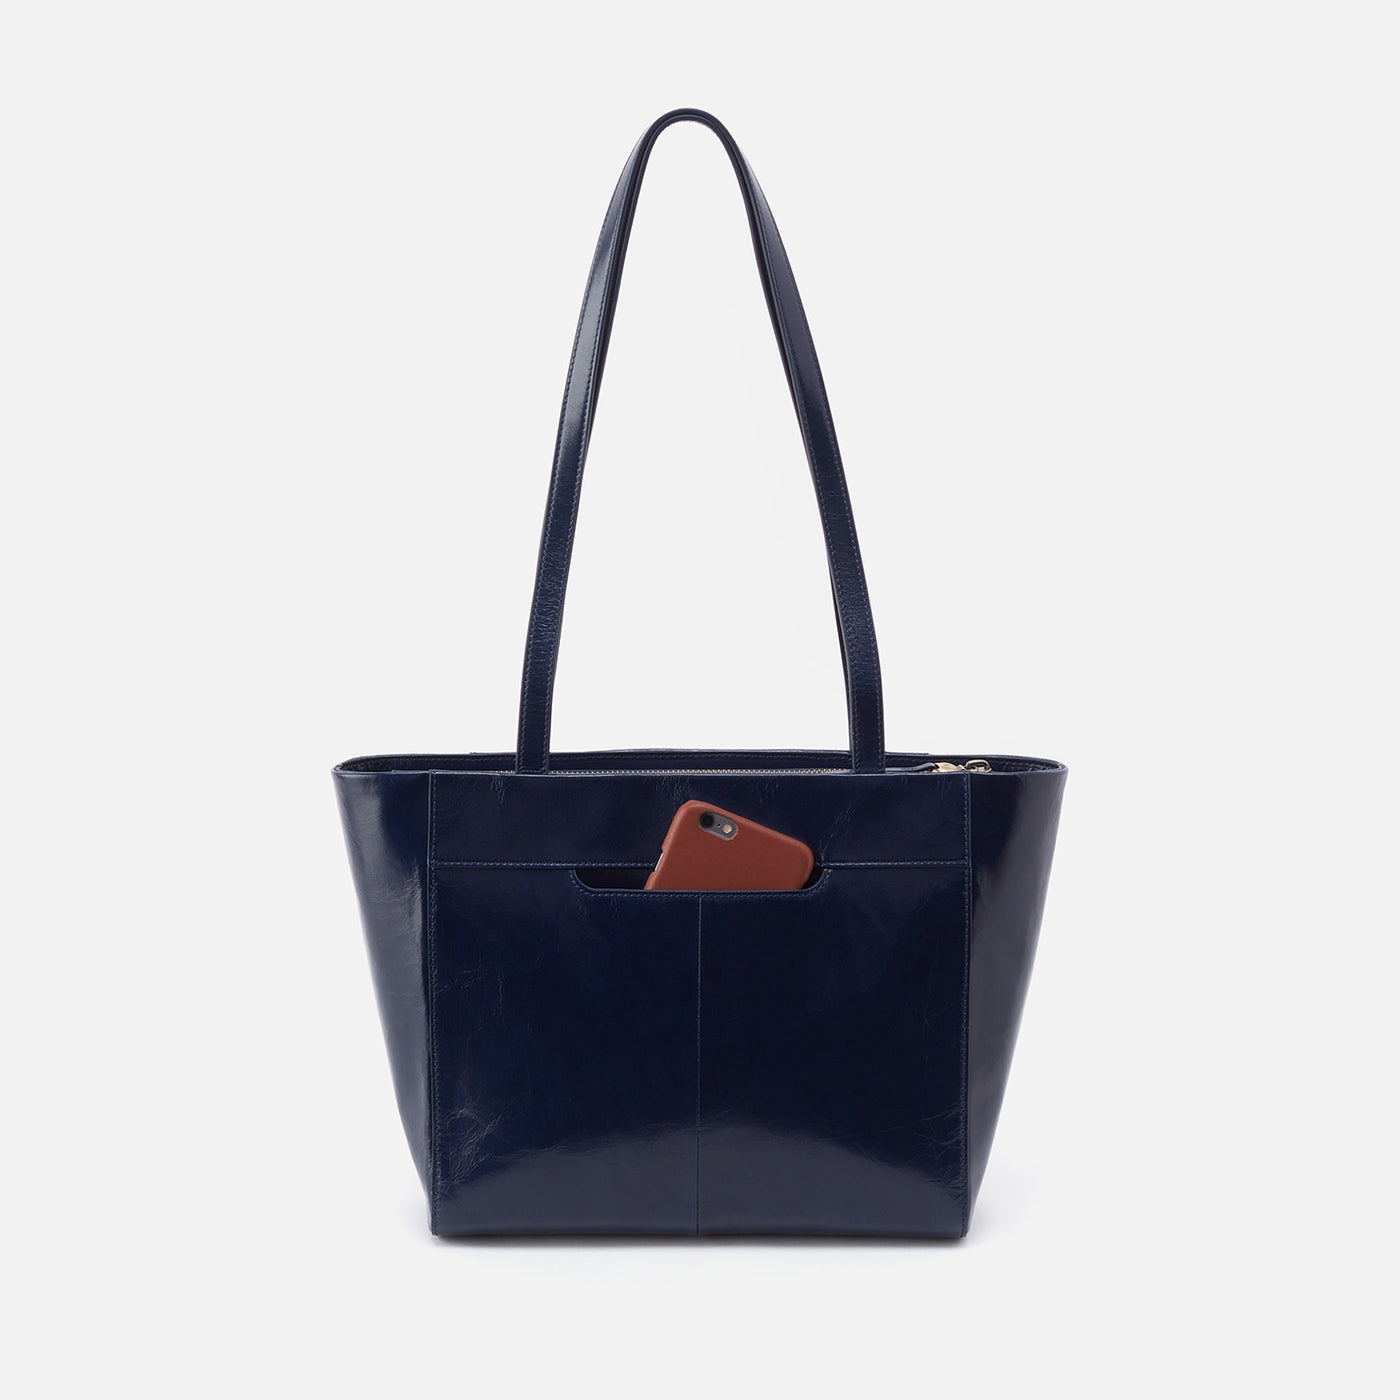 Haven Tote in Polished Leather - Nightshade